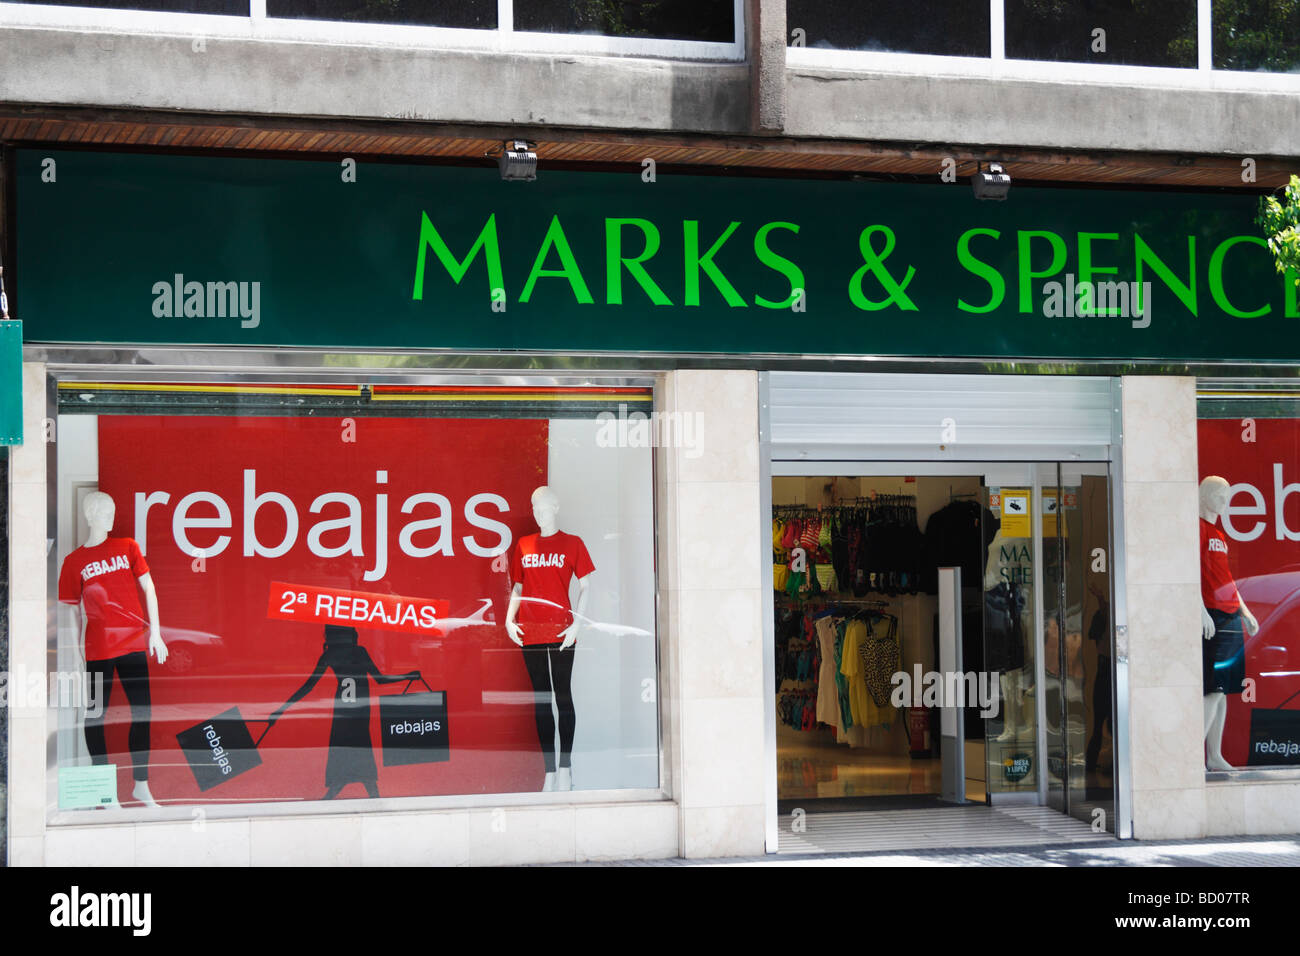 Rebajas signs (sale) in Marks and Spencer shop in Spain Stock Photo - Alamy